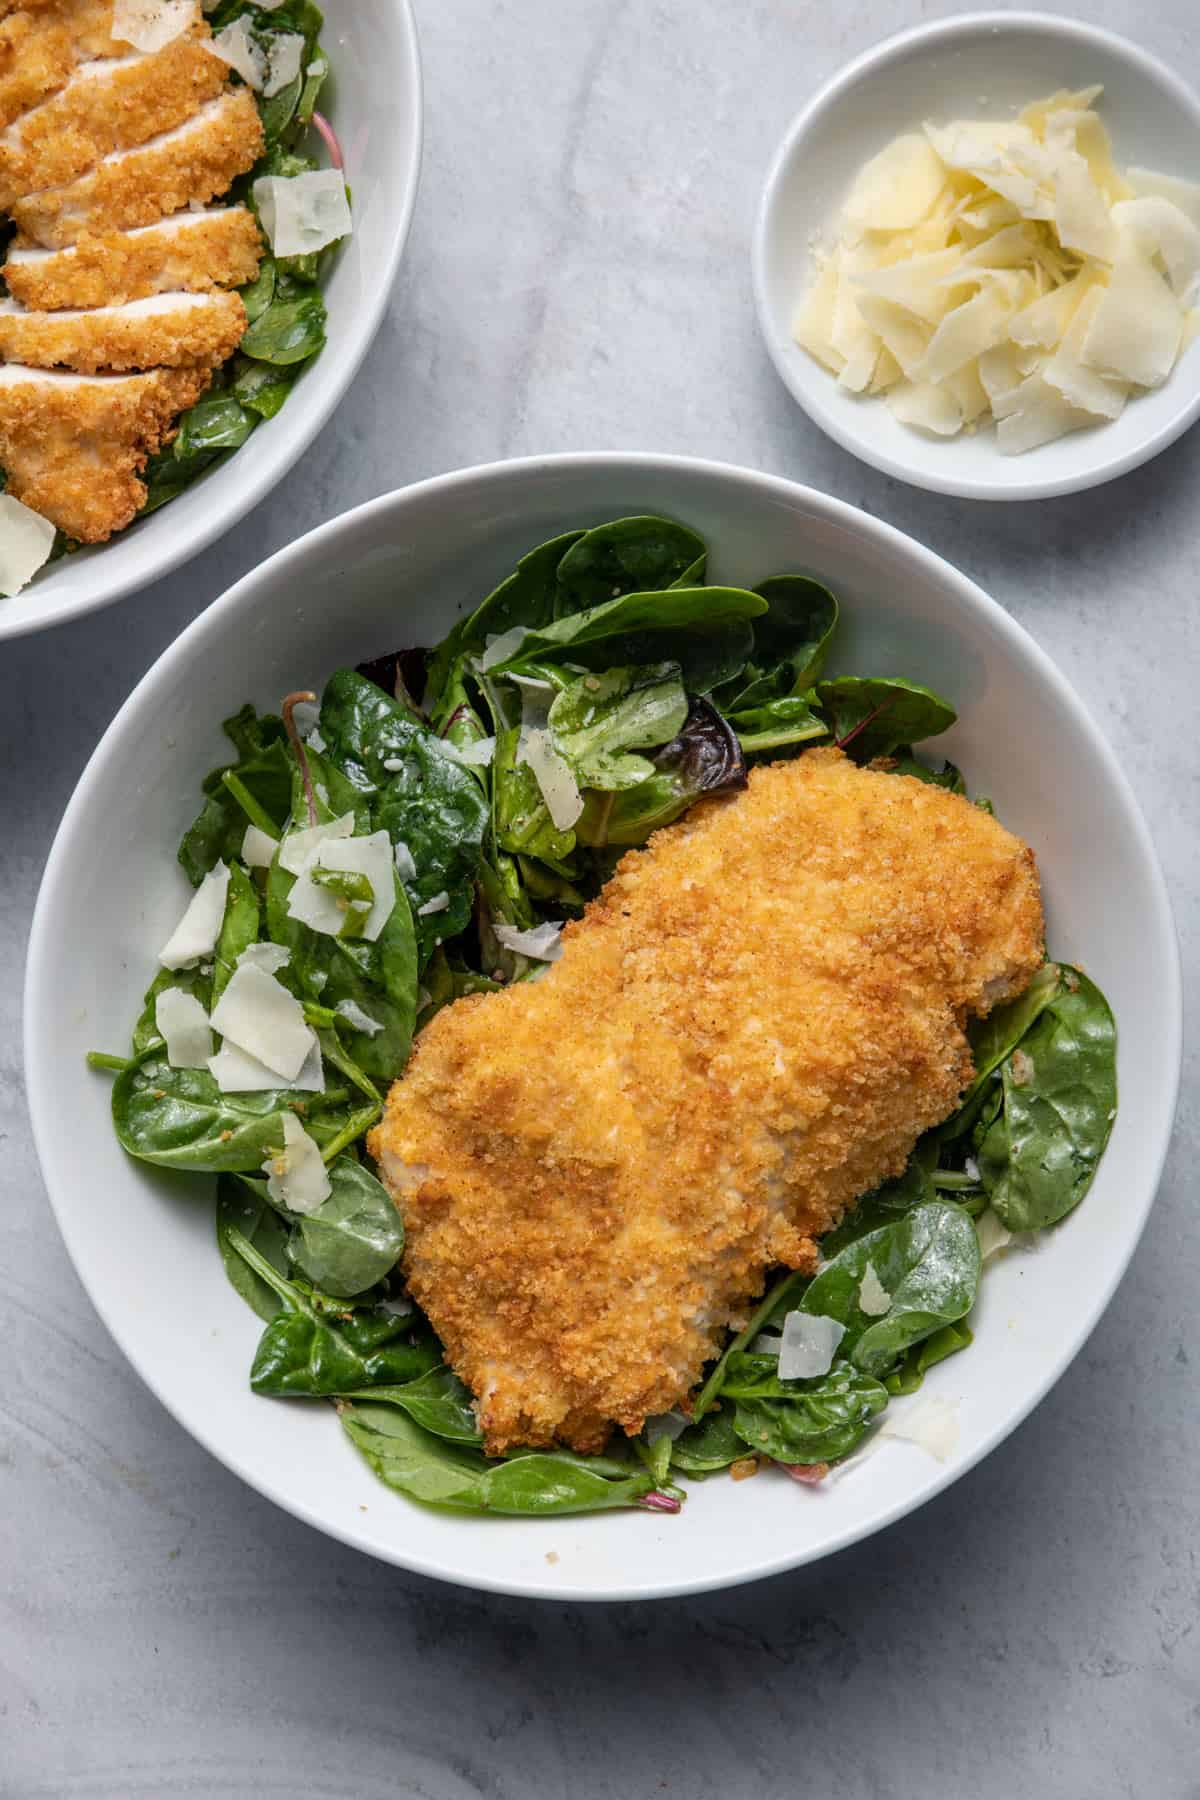 Bowl of tossed salad with Fried Chicken Parmesan on top